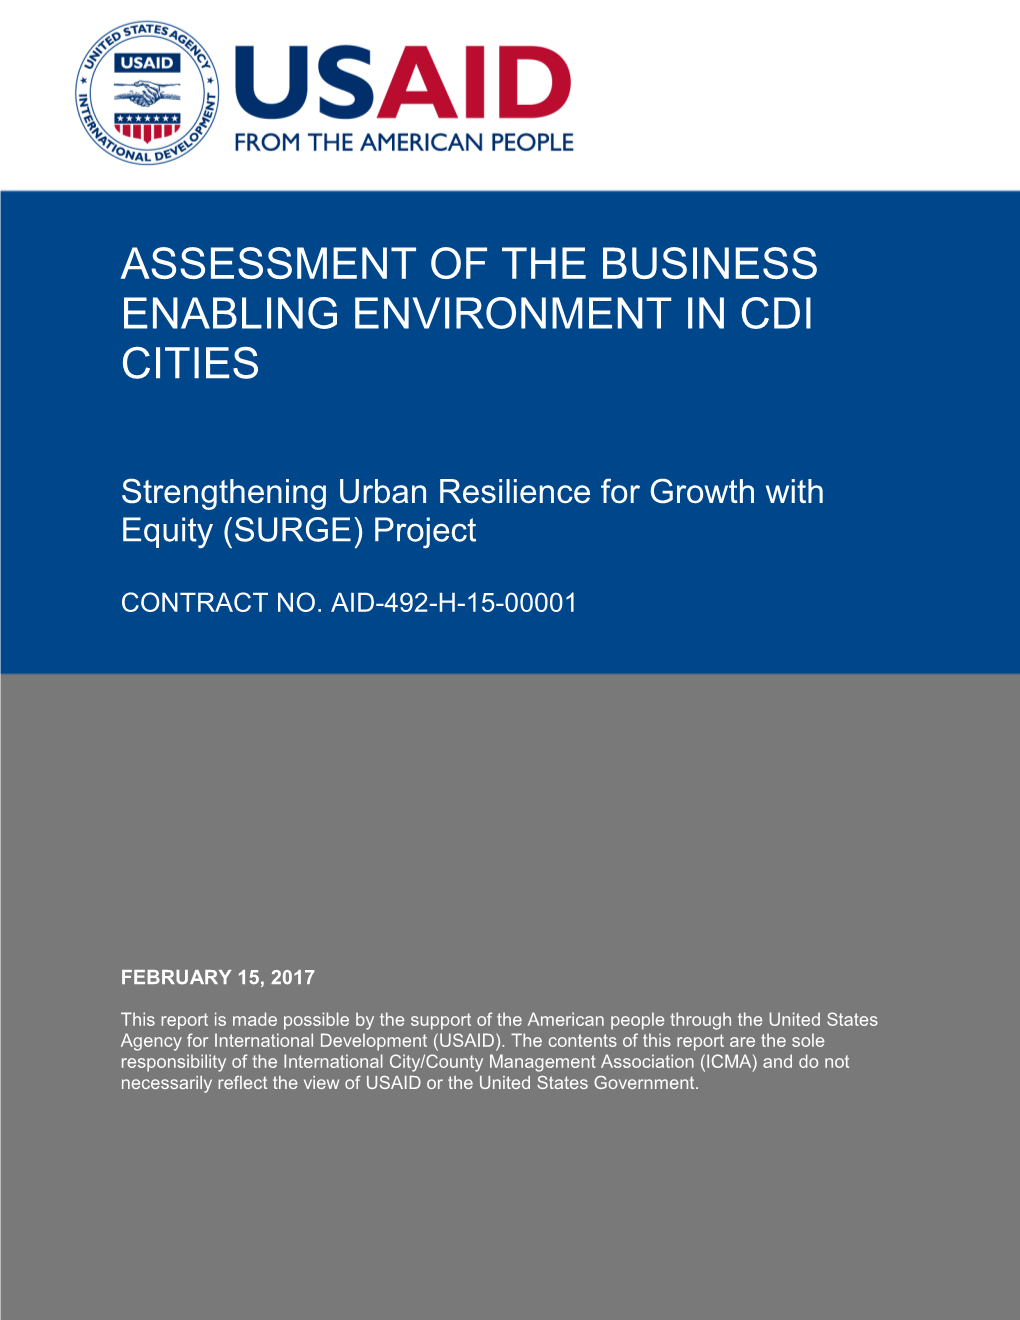 Assessment of the Business Enabling Environment in Cdi Cities